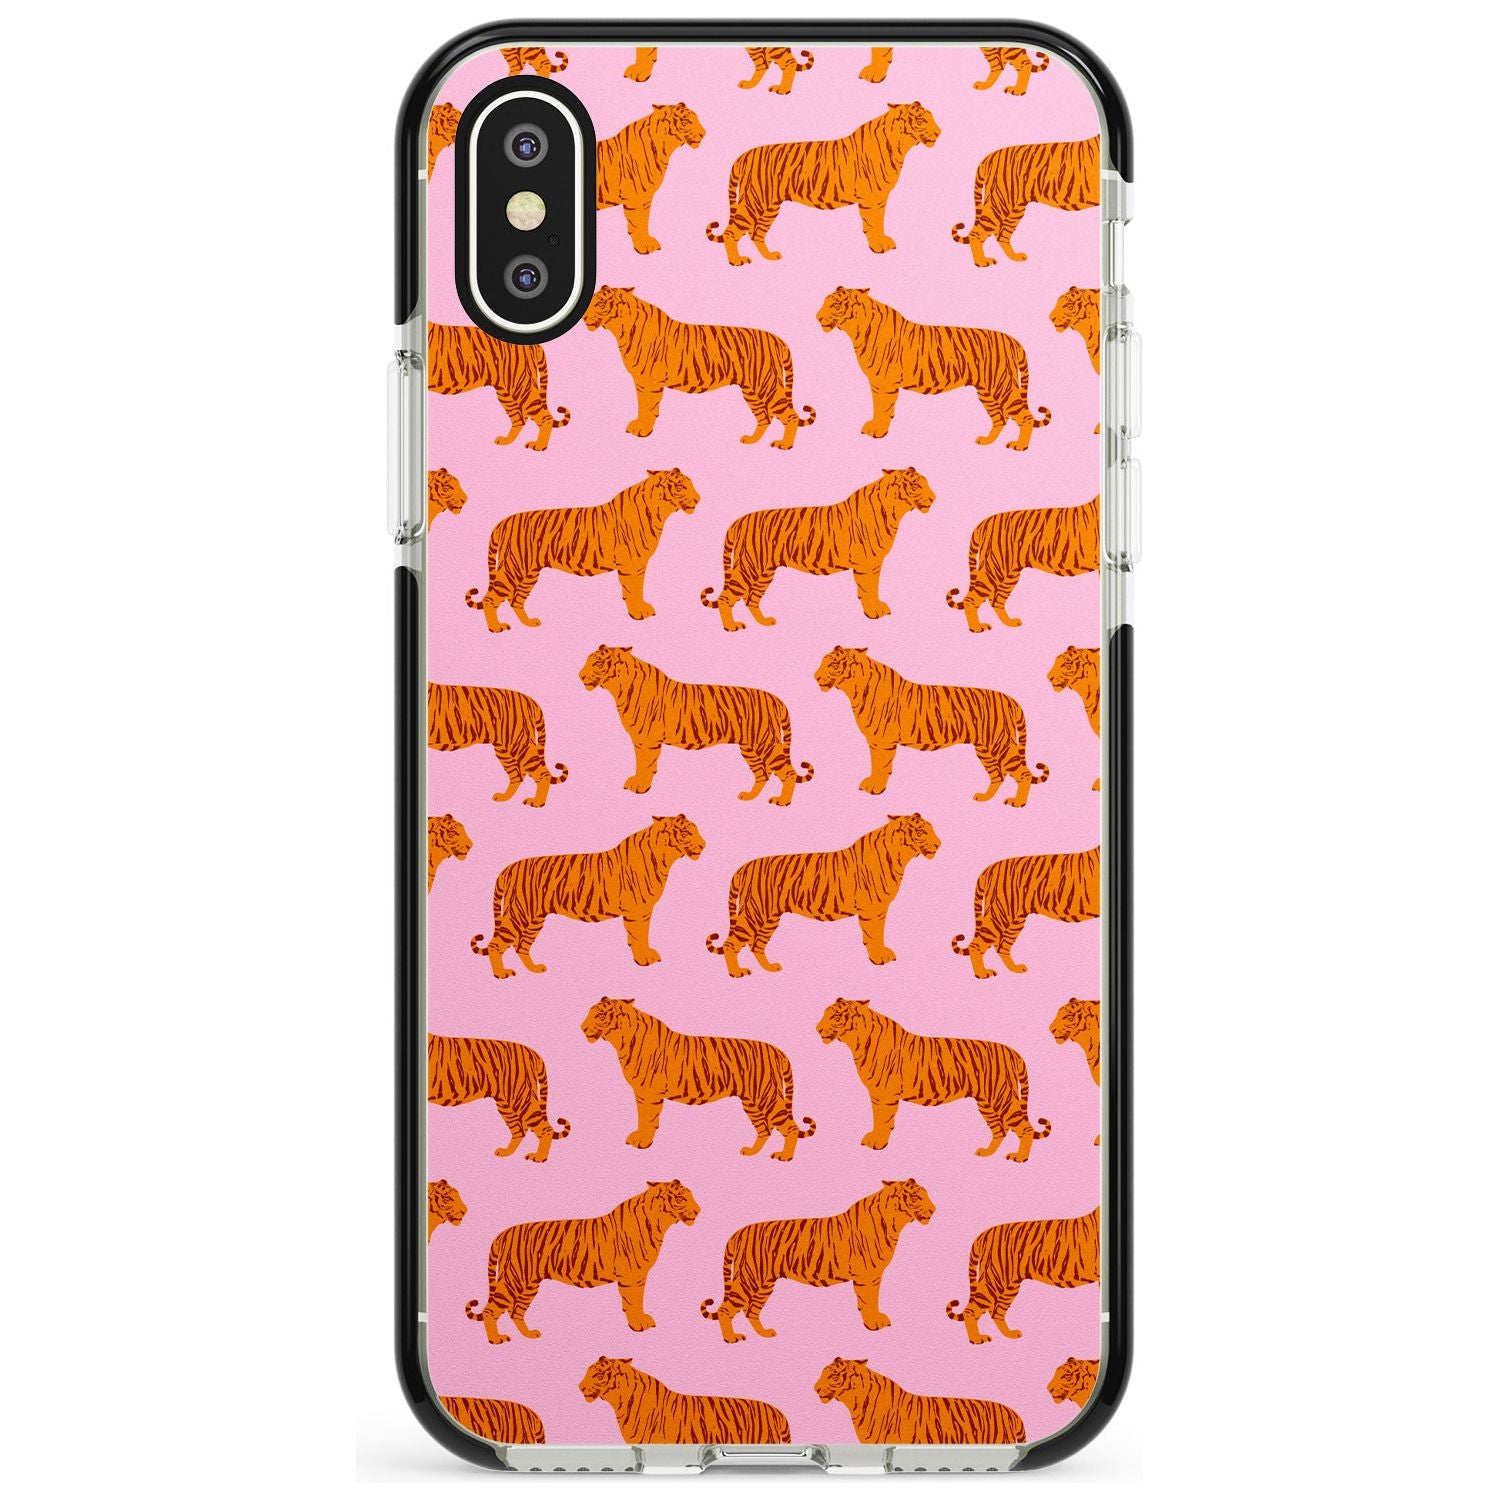 Tigers on Pink Pattern Black Impact Phone Case for iPhone X XS Max XR